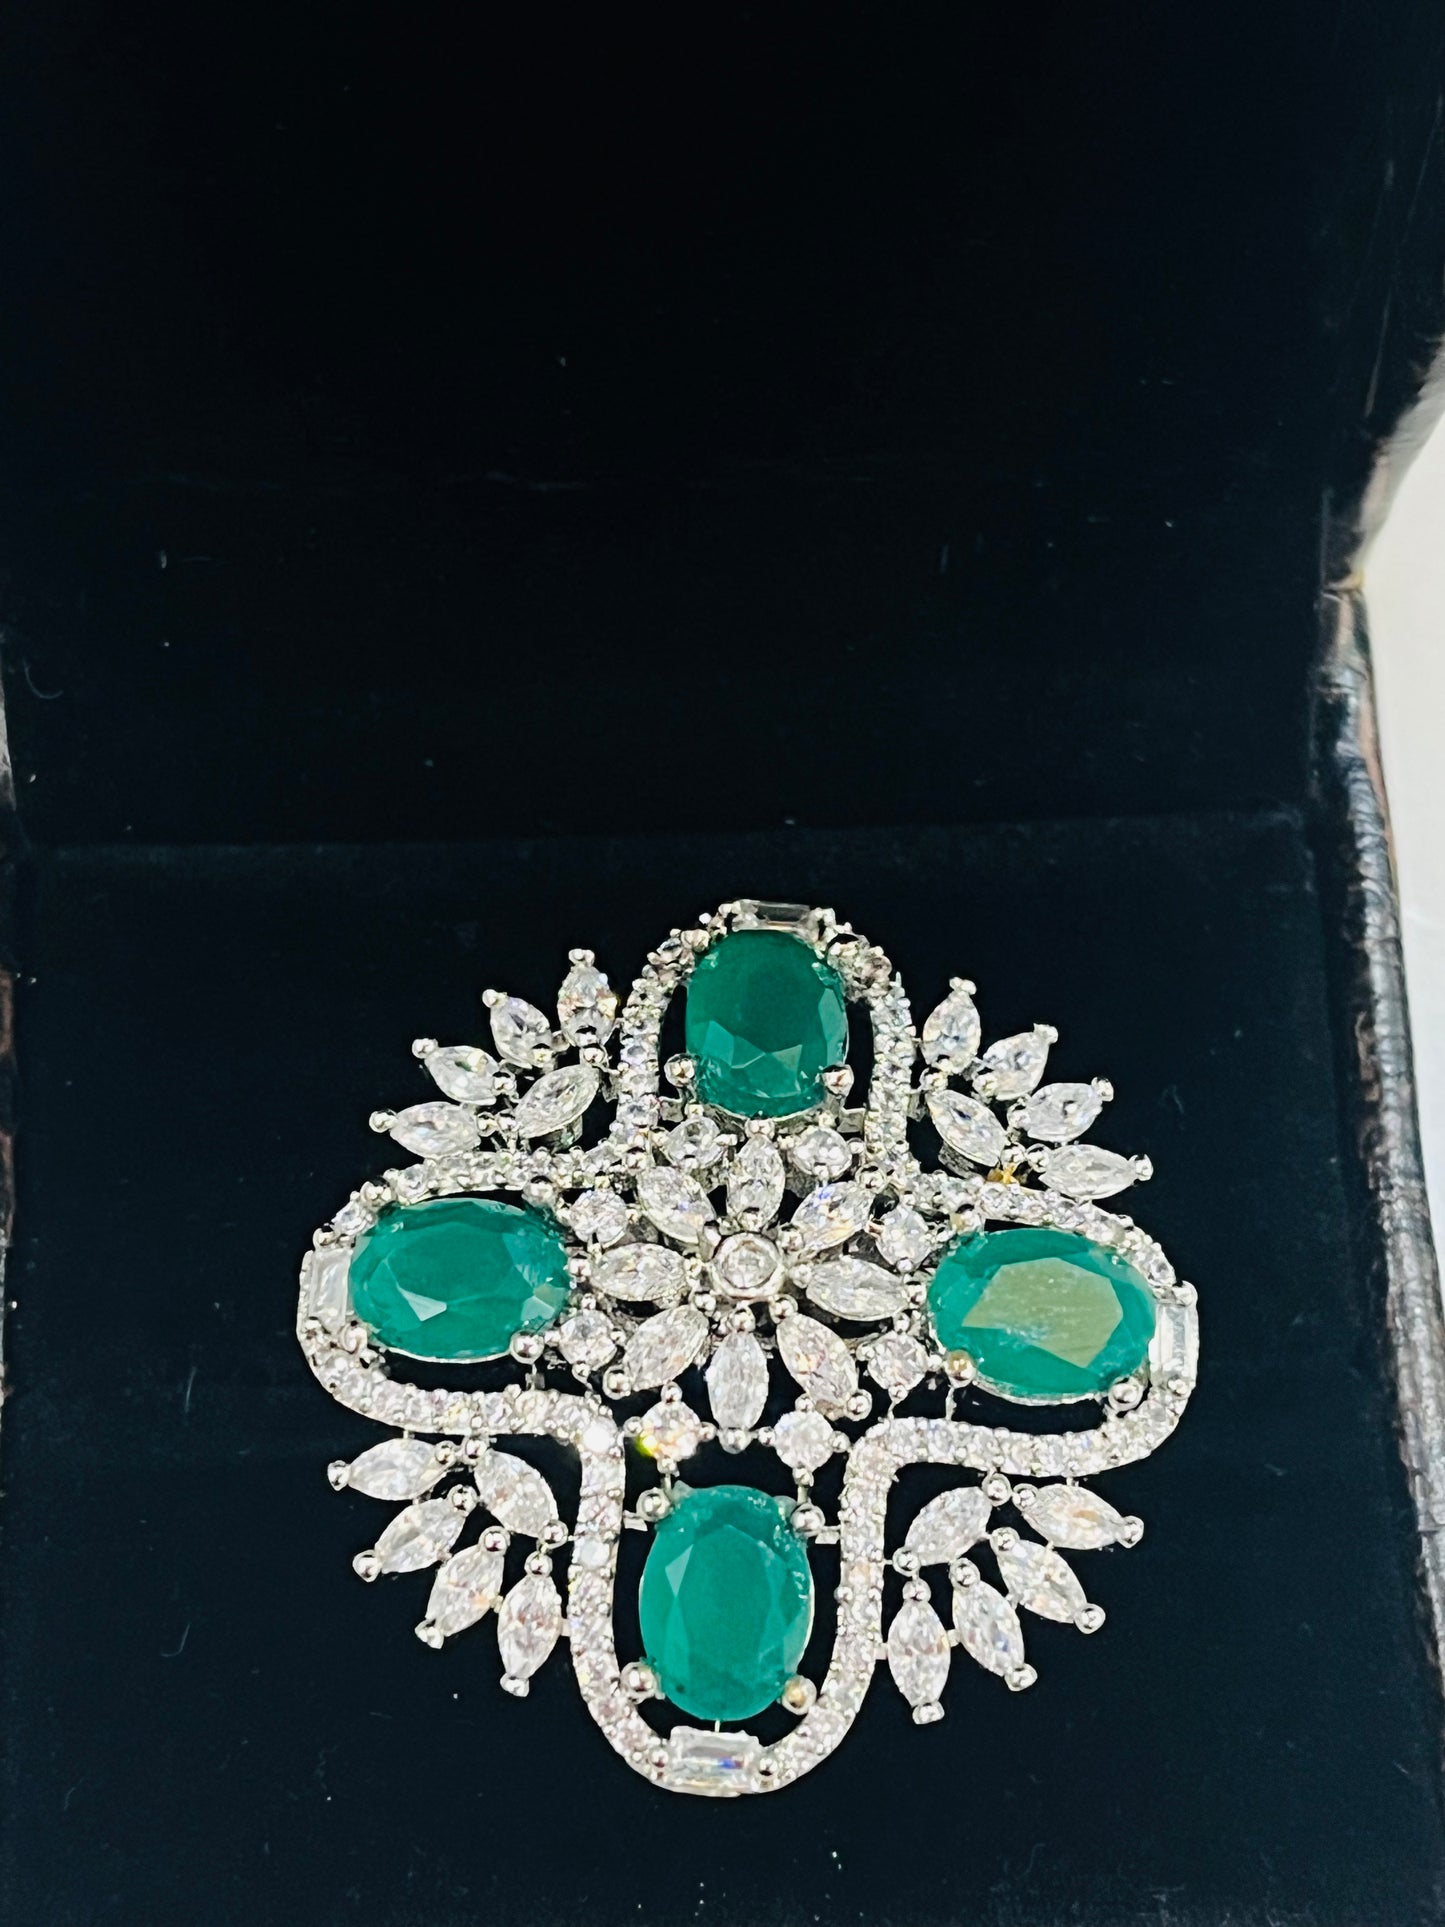 Beautiful AD Green Stone Partywear Ring